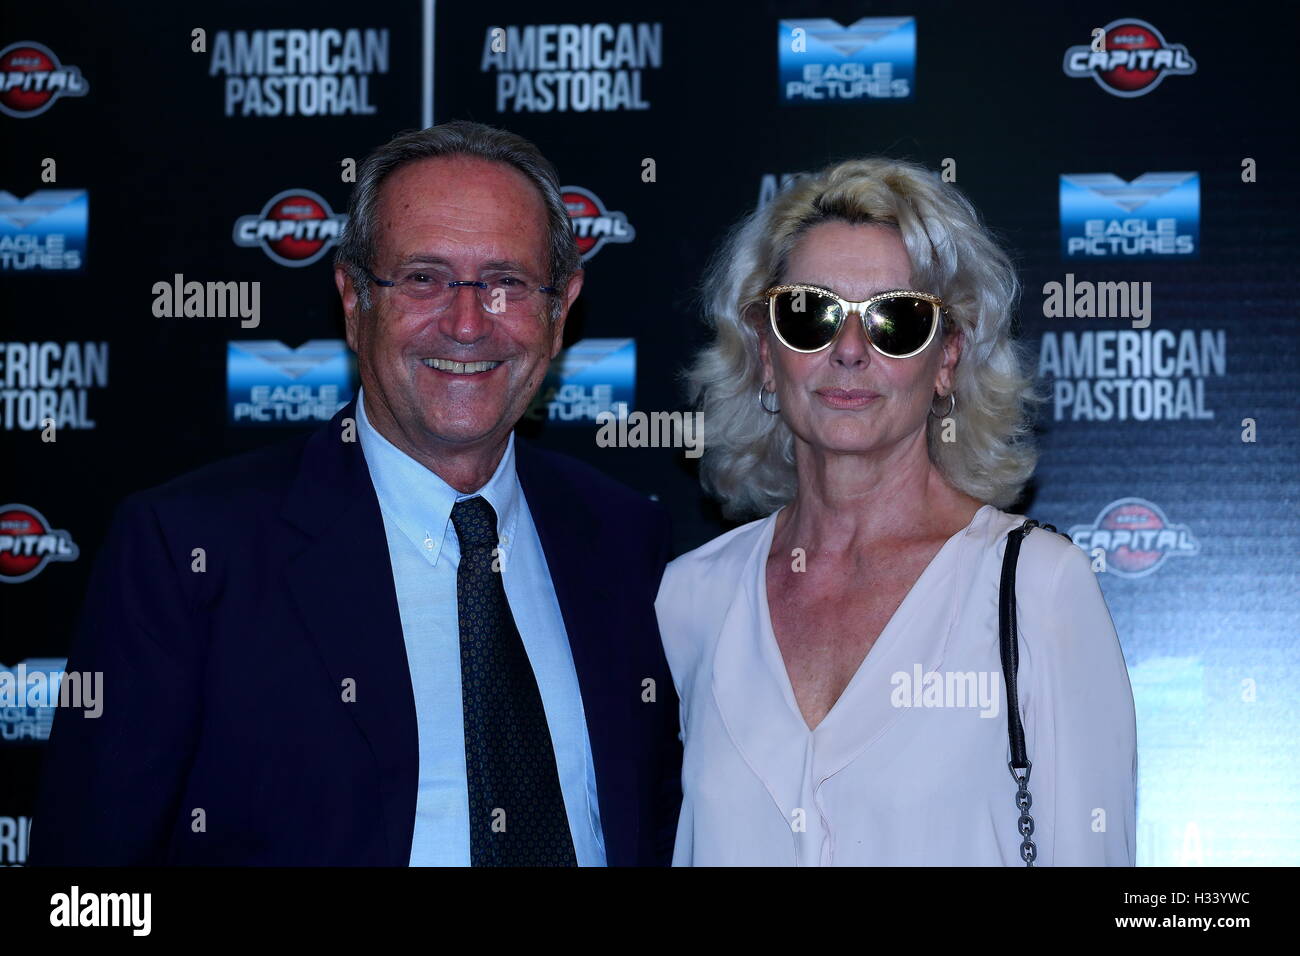 Roma, Italy. 03rd Oct, 2016. Italian actress Monica Guerritore with her husband Roberto Zaccaria during Premiere in Cinema Barberini of film 'American Pastoral' © Matteo Nardone/Pacific Press/Alamy Live News Stock Photo